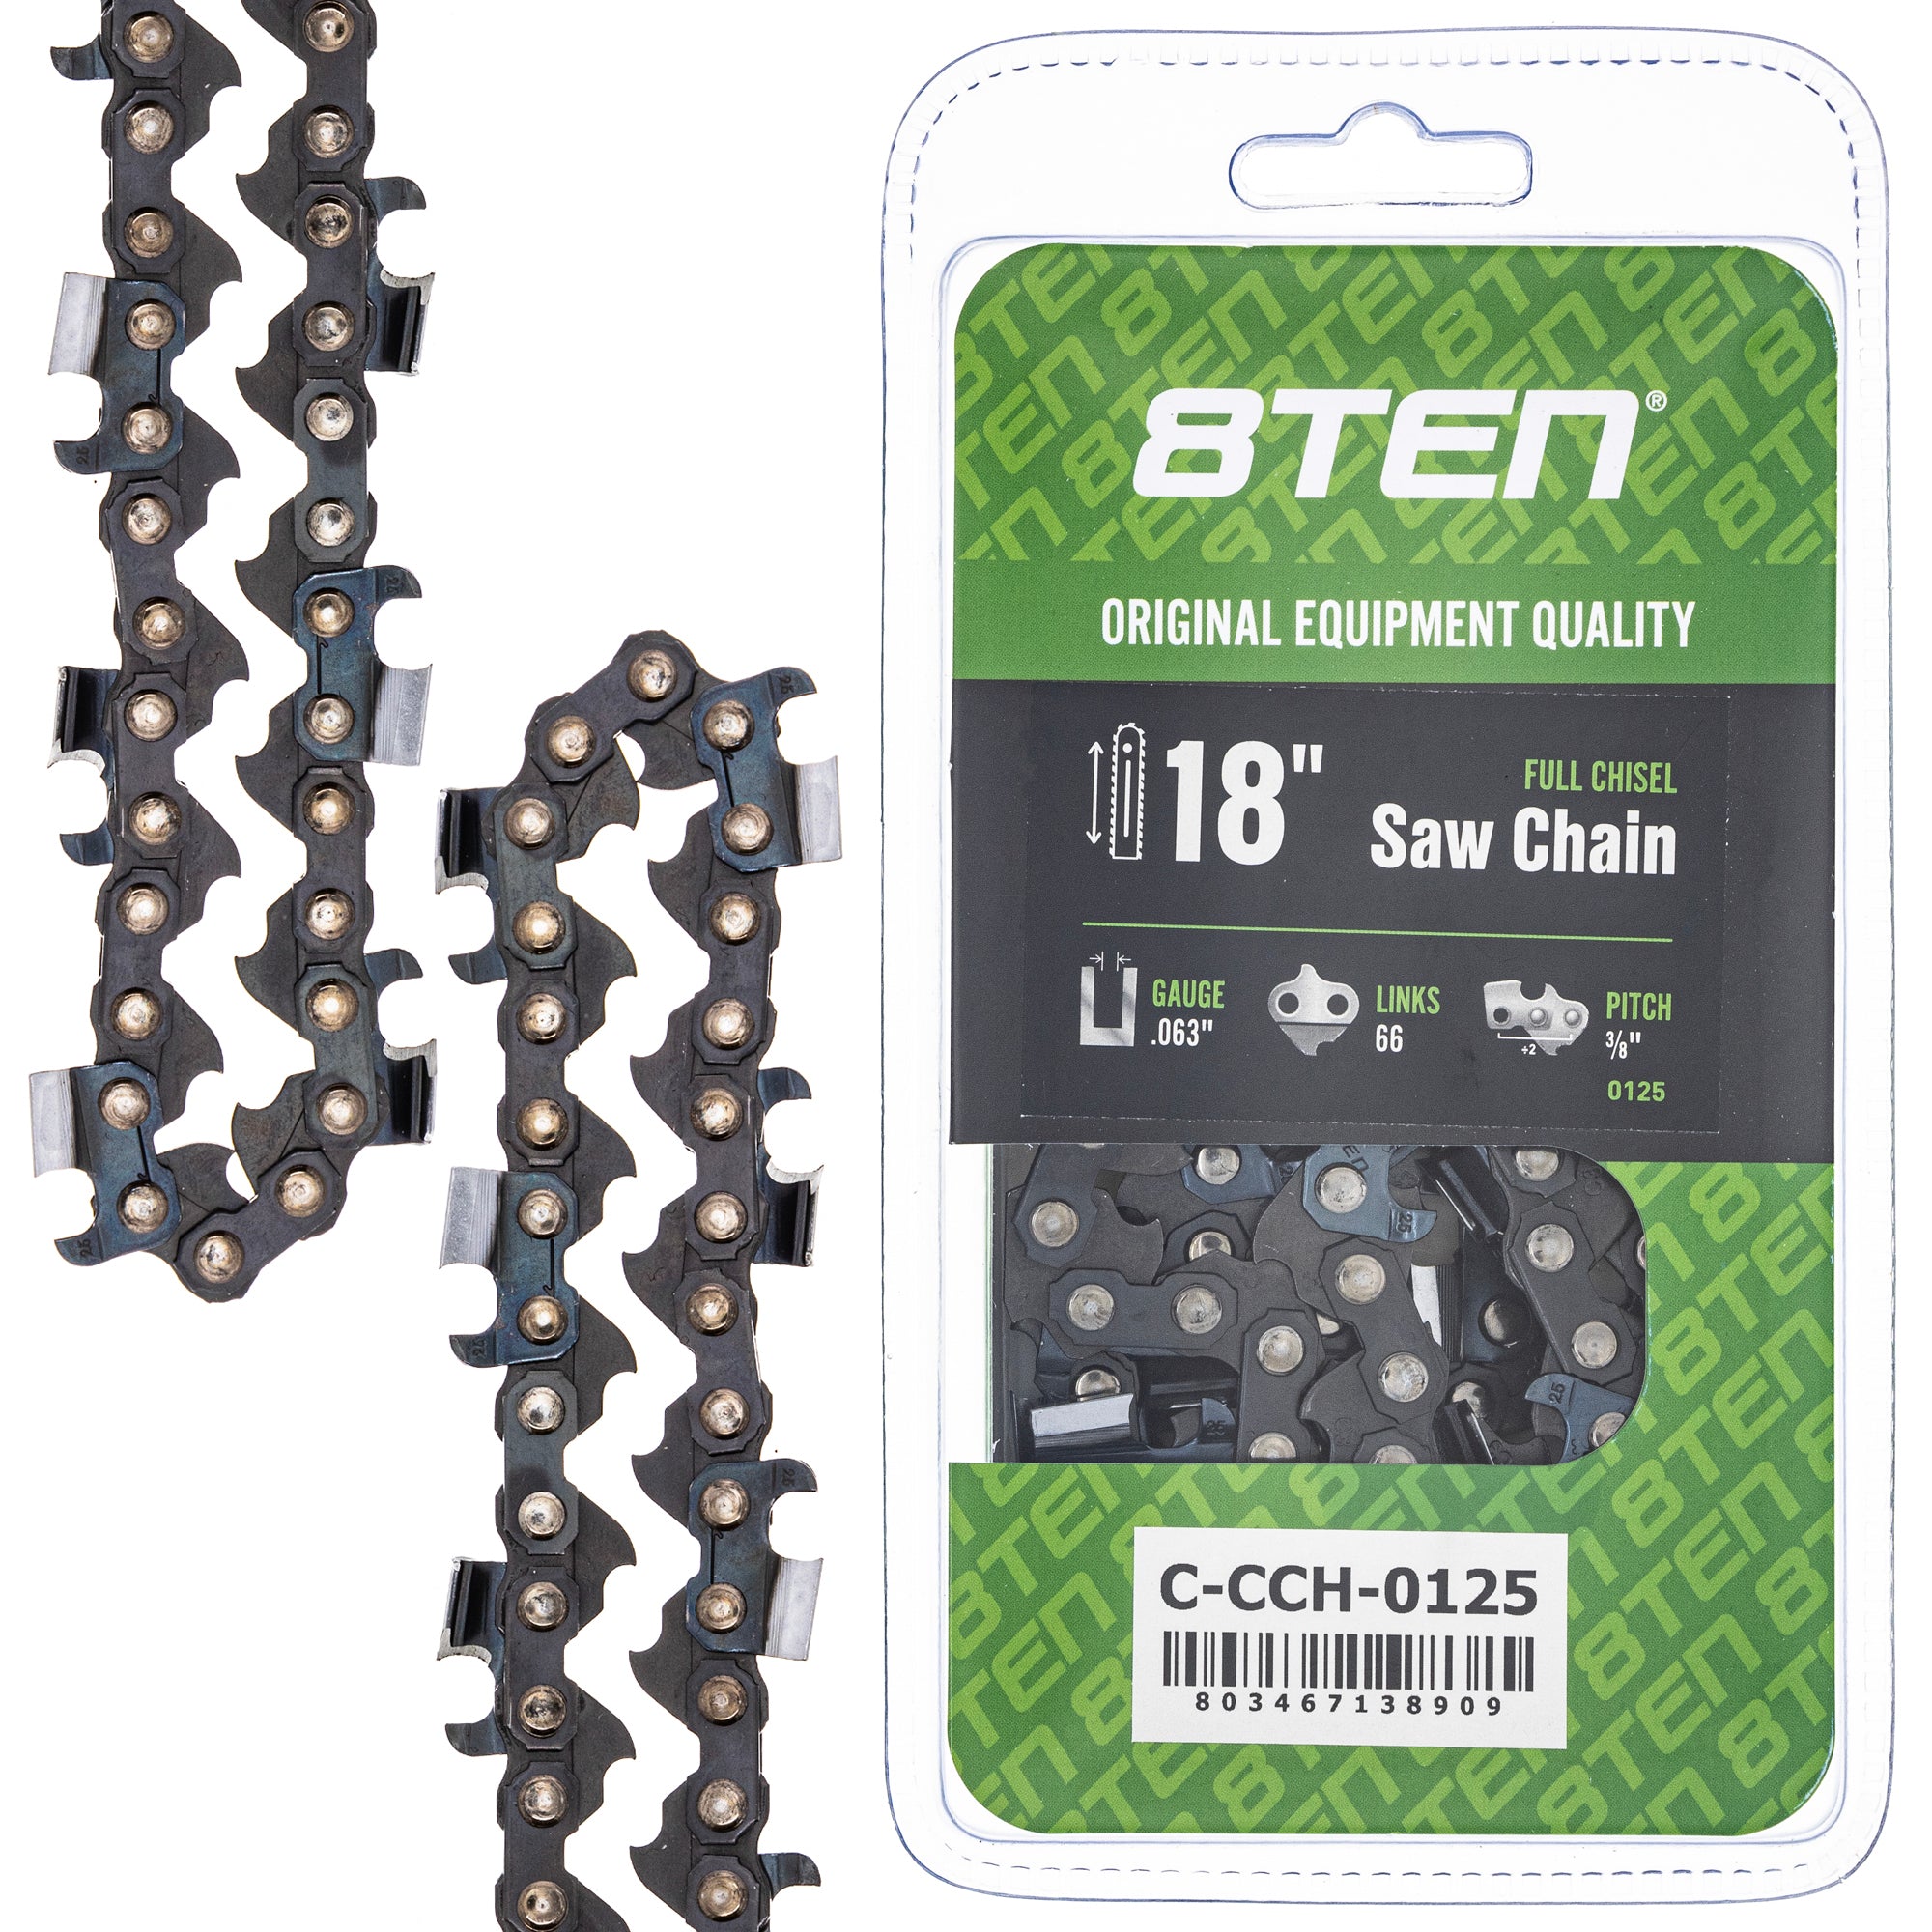 8TEN MK1010392 Guide Bar & Chain for MSE MS E 066